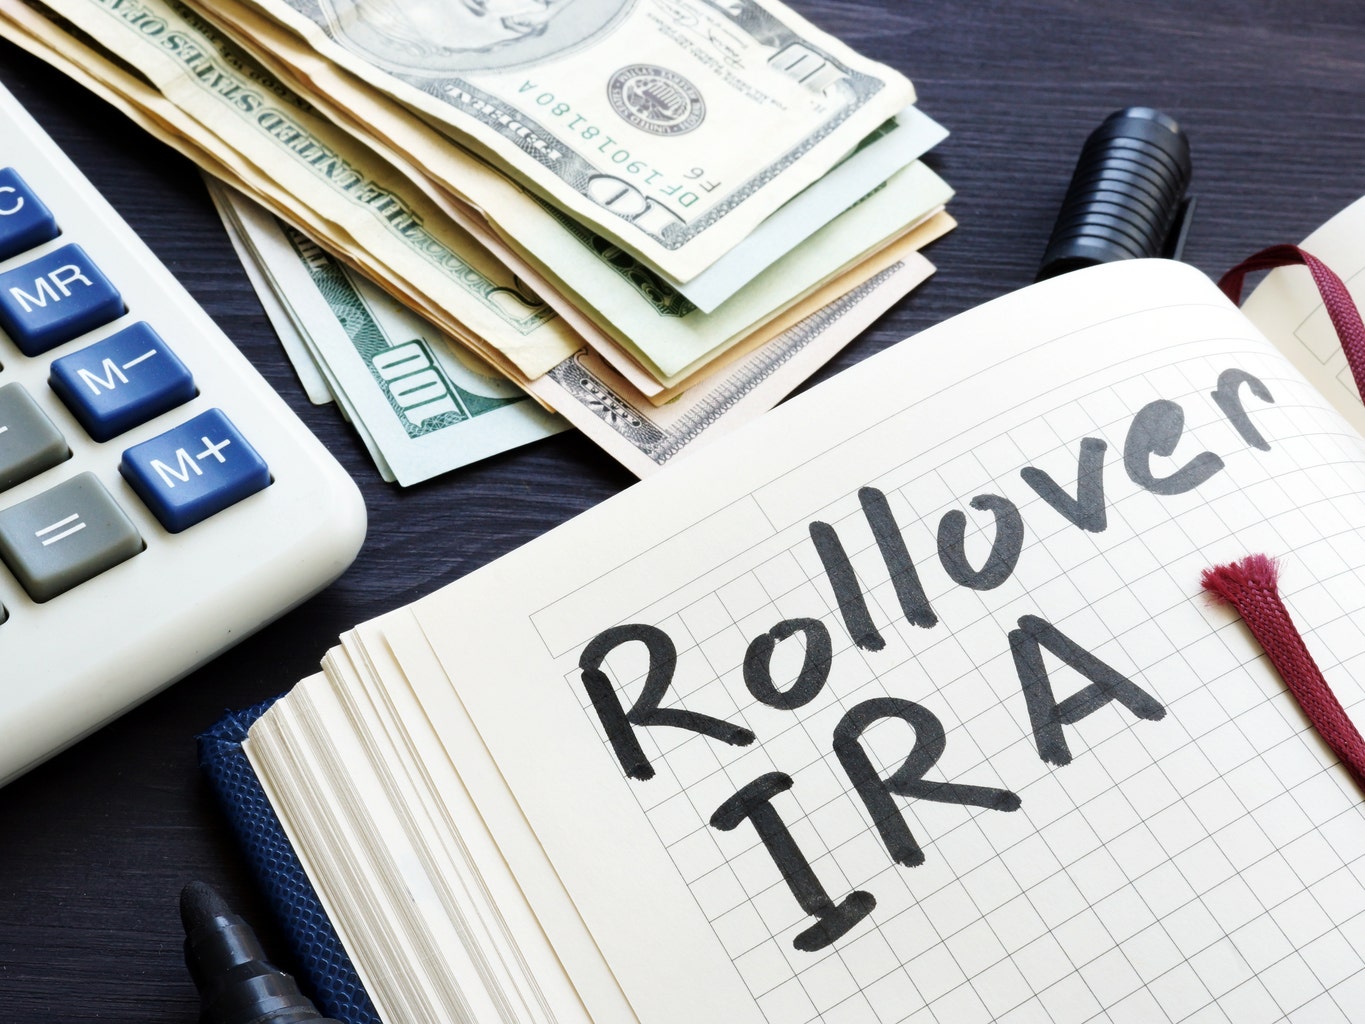 Should I Rollover My 401k Or Start A Roth Ira? for Dummies